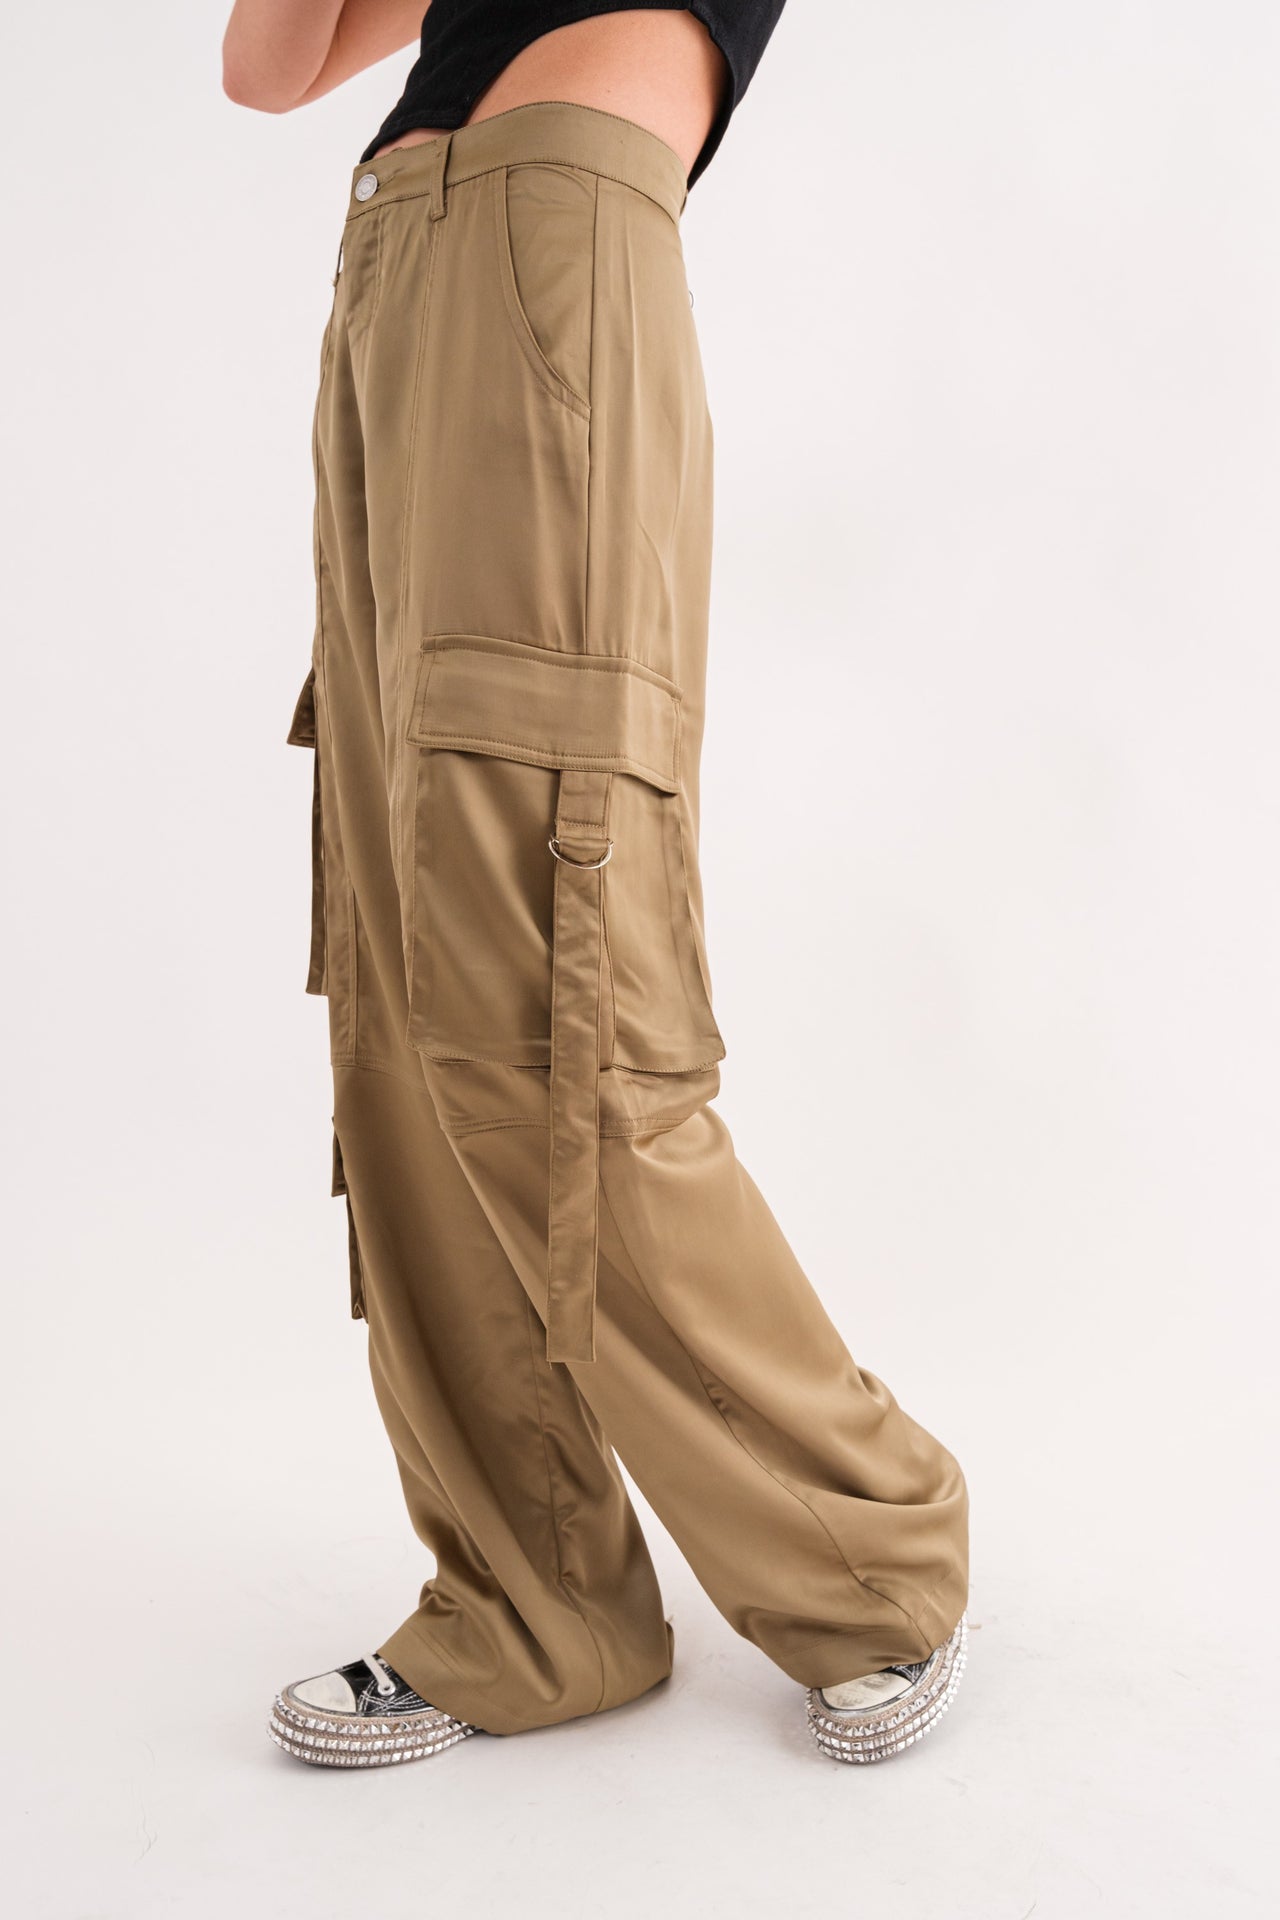 Cargo Pant With Buckle Strap Pockets Olive, Pant Bottom by Signature 8 | LIT Boutique